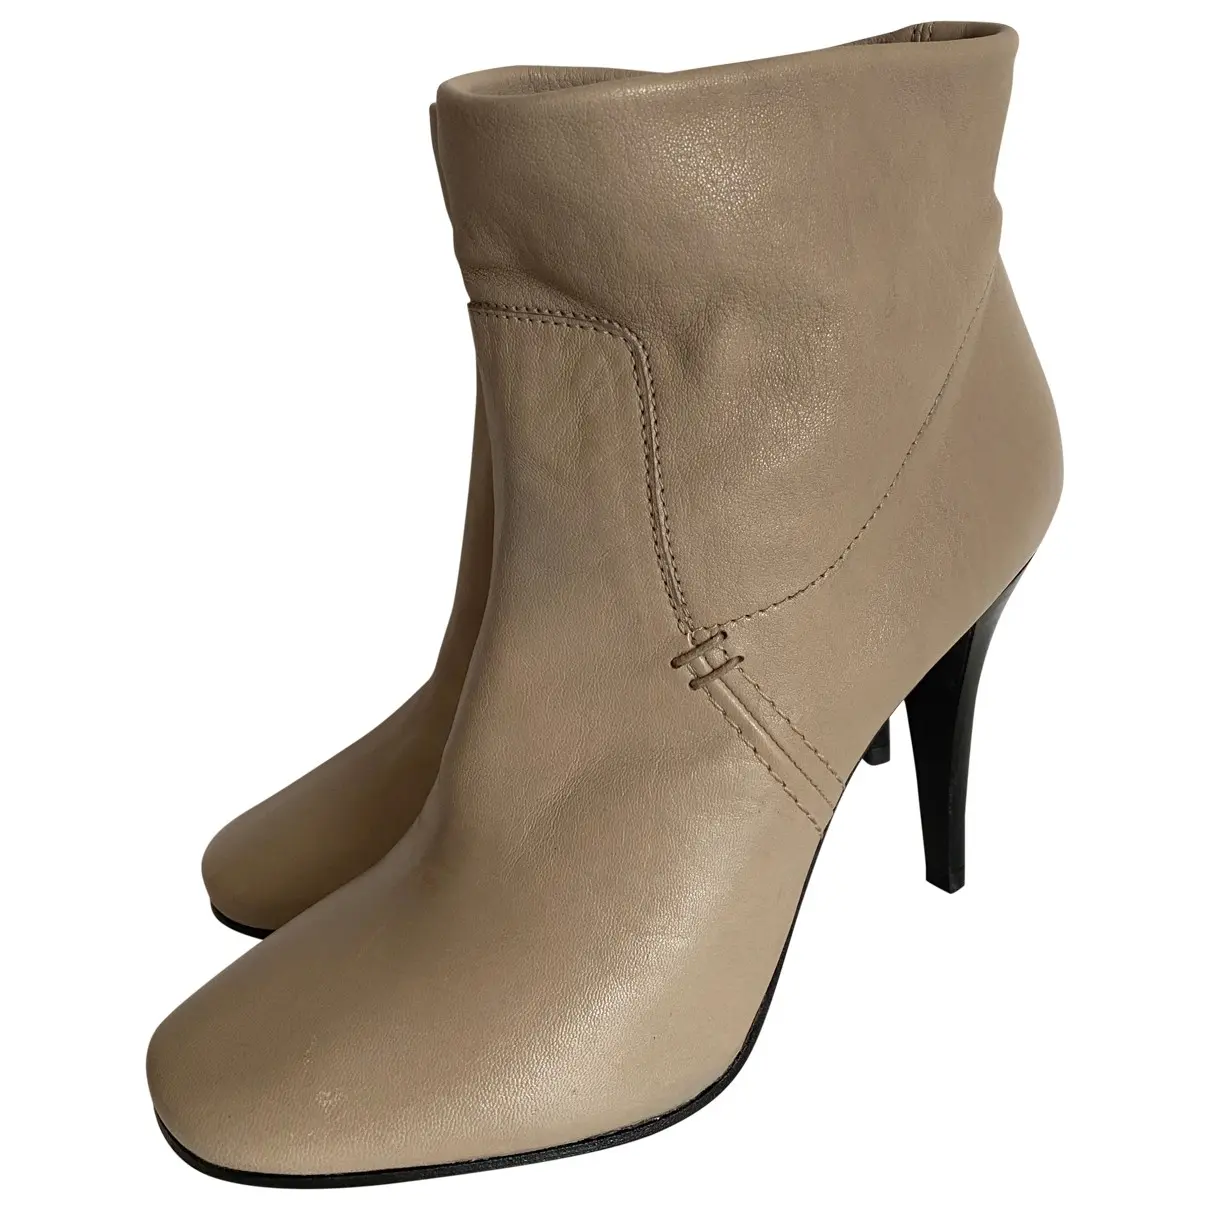 Leather ankle boots Barbara Bui